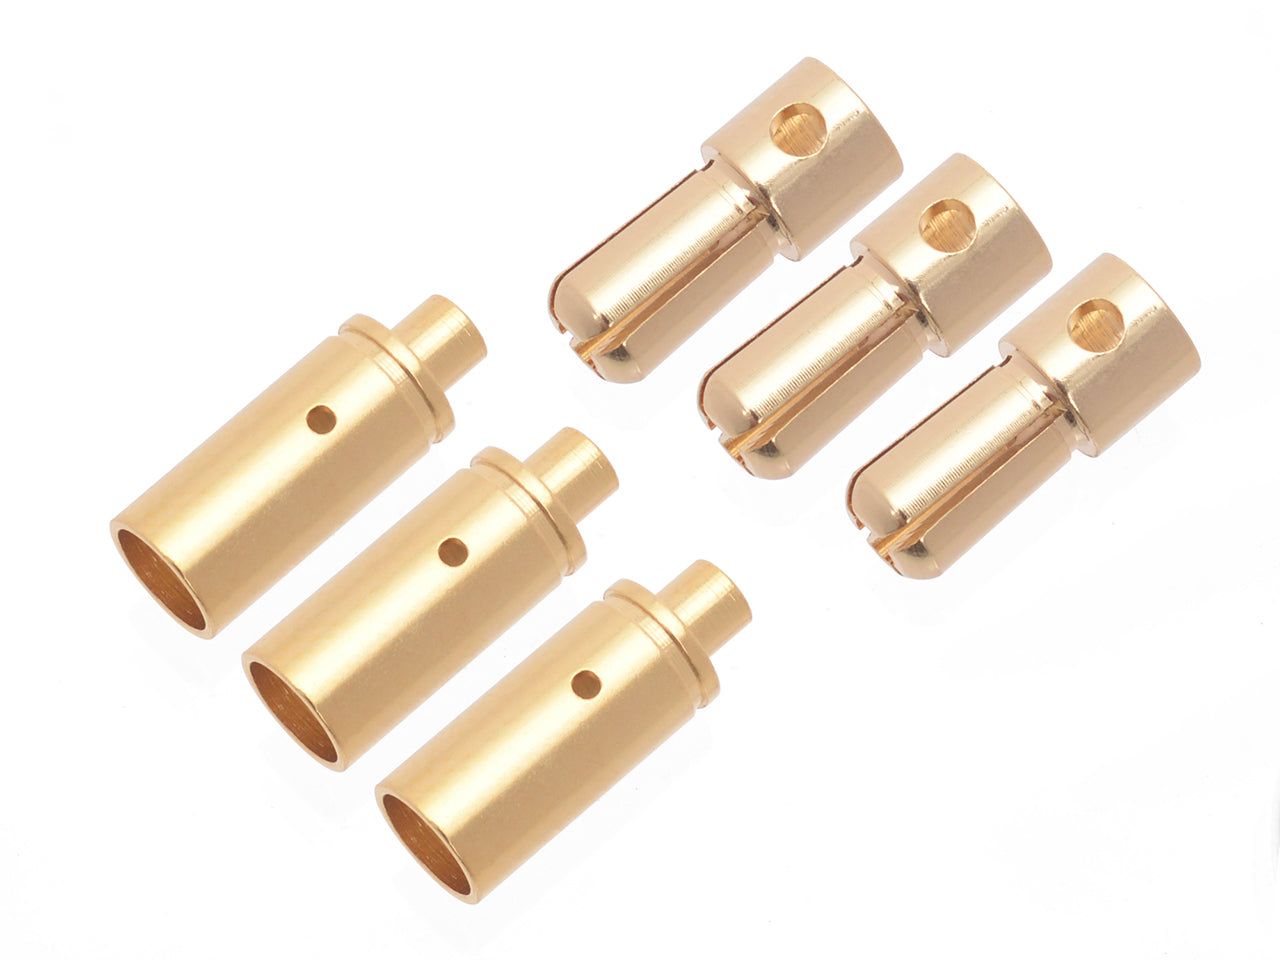 G-FORCE GA057 3.5mm connector set (3 male and female each) - BanzaiHobby